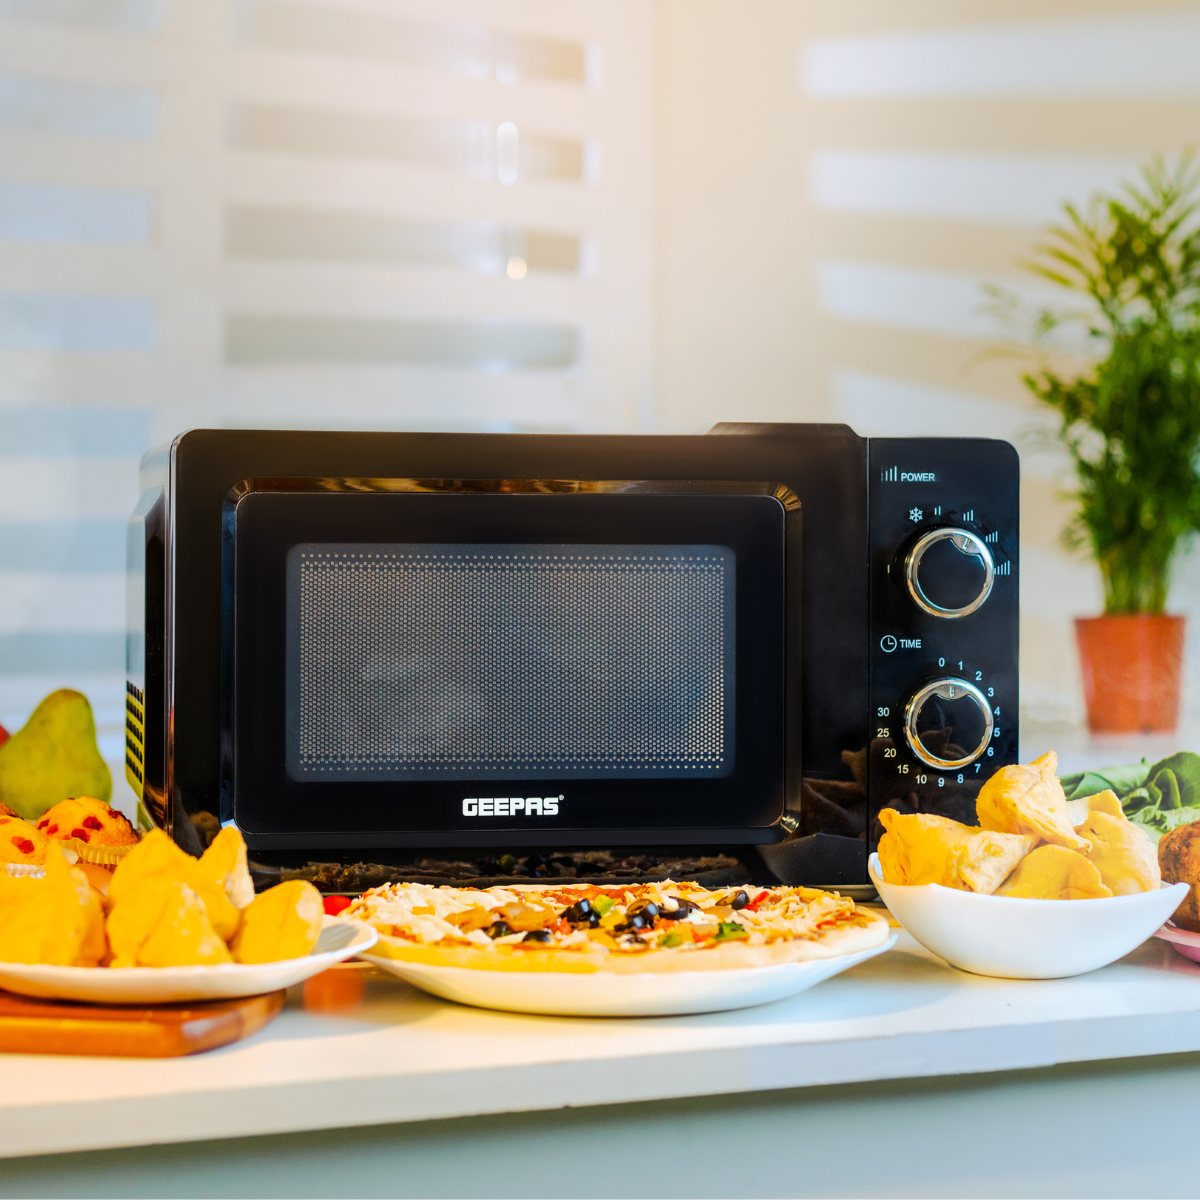 Microwave Oven vs Convection Microwave